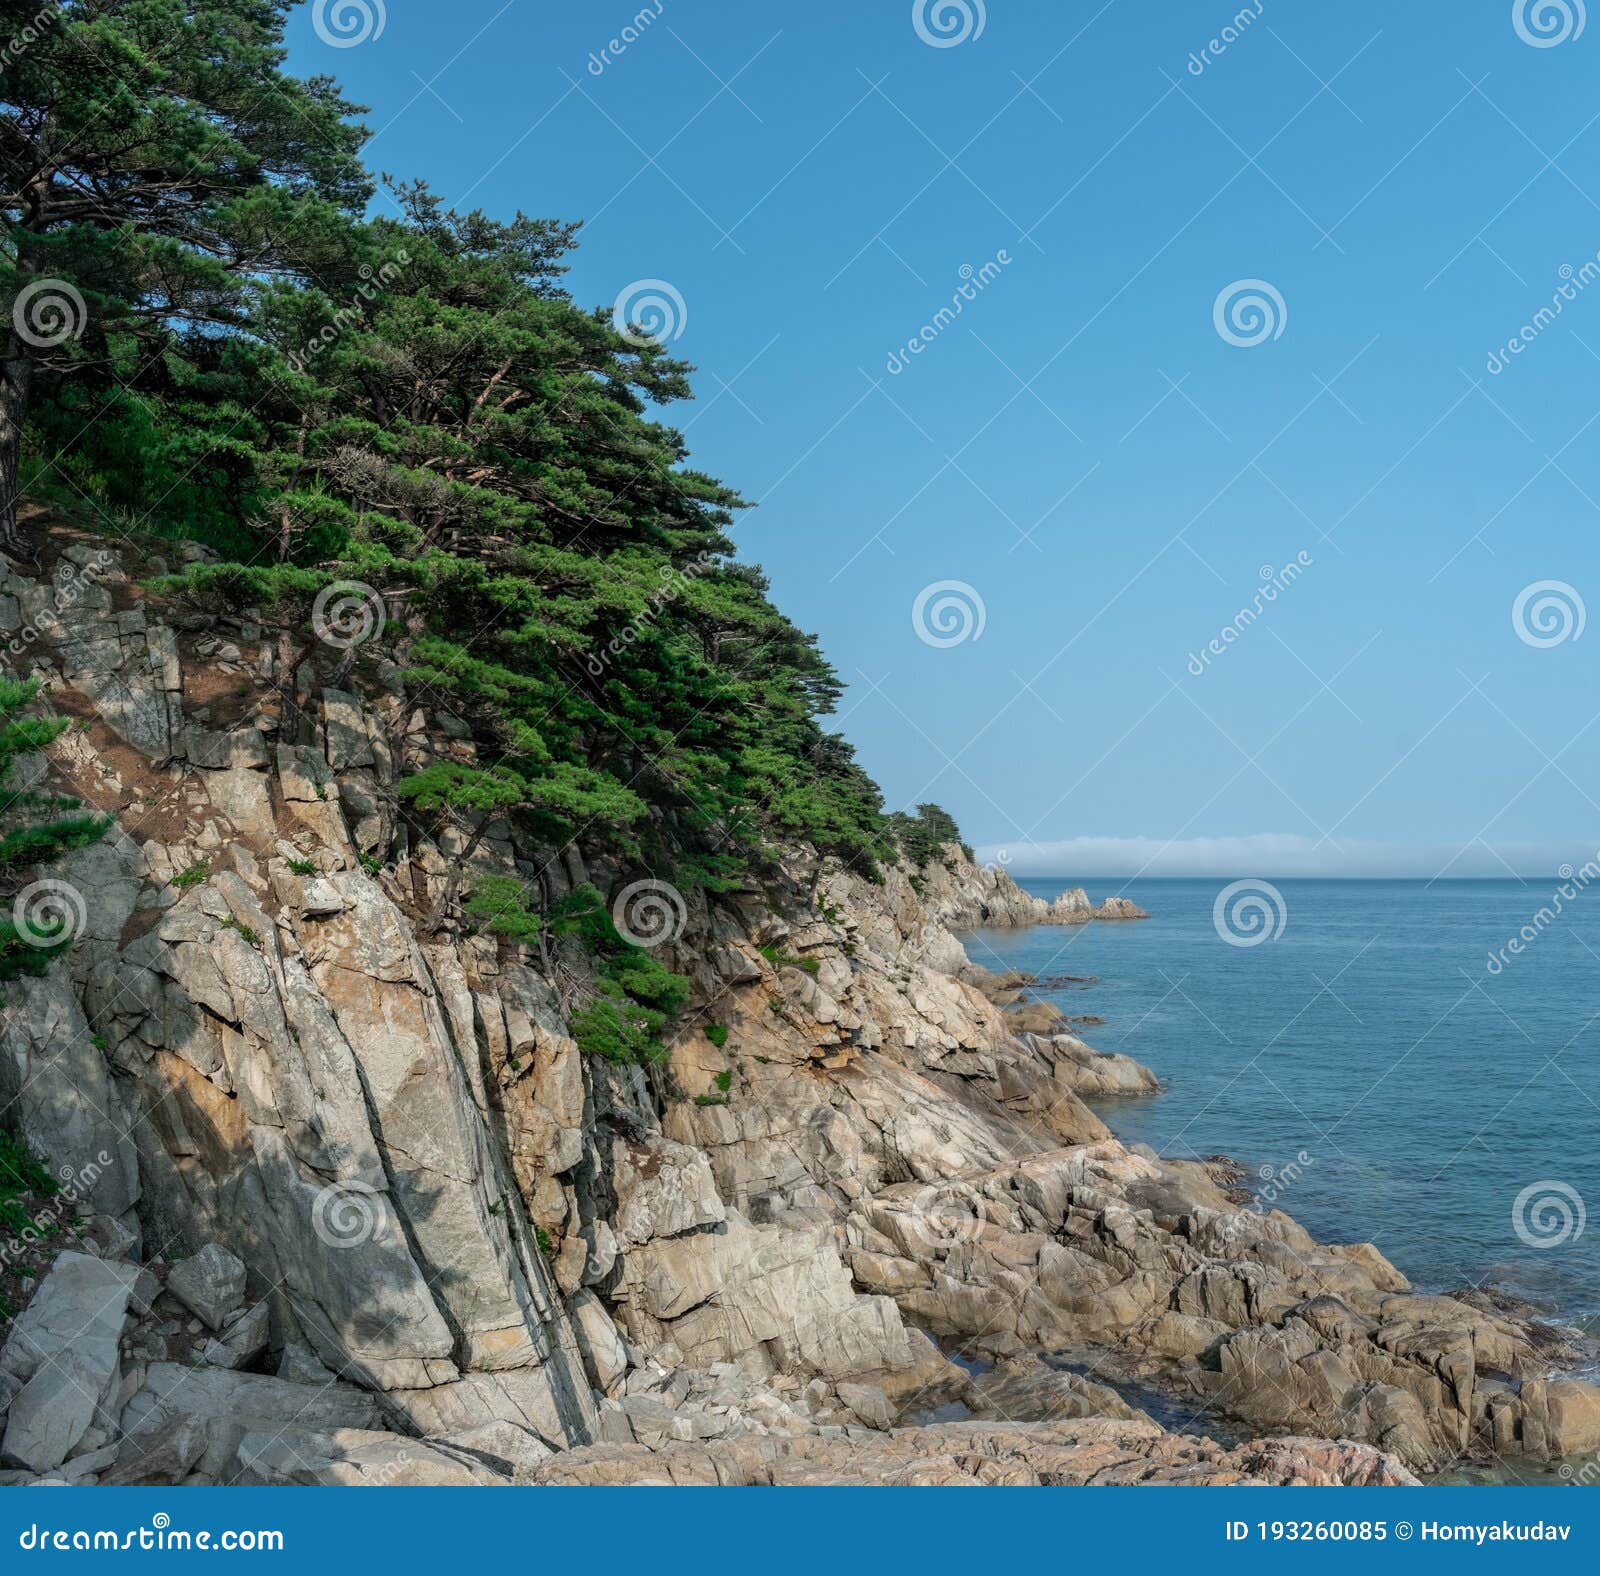 Beige Rocks with Pine Trees and Sea Stock Image - Image of trees ...